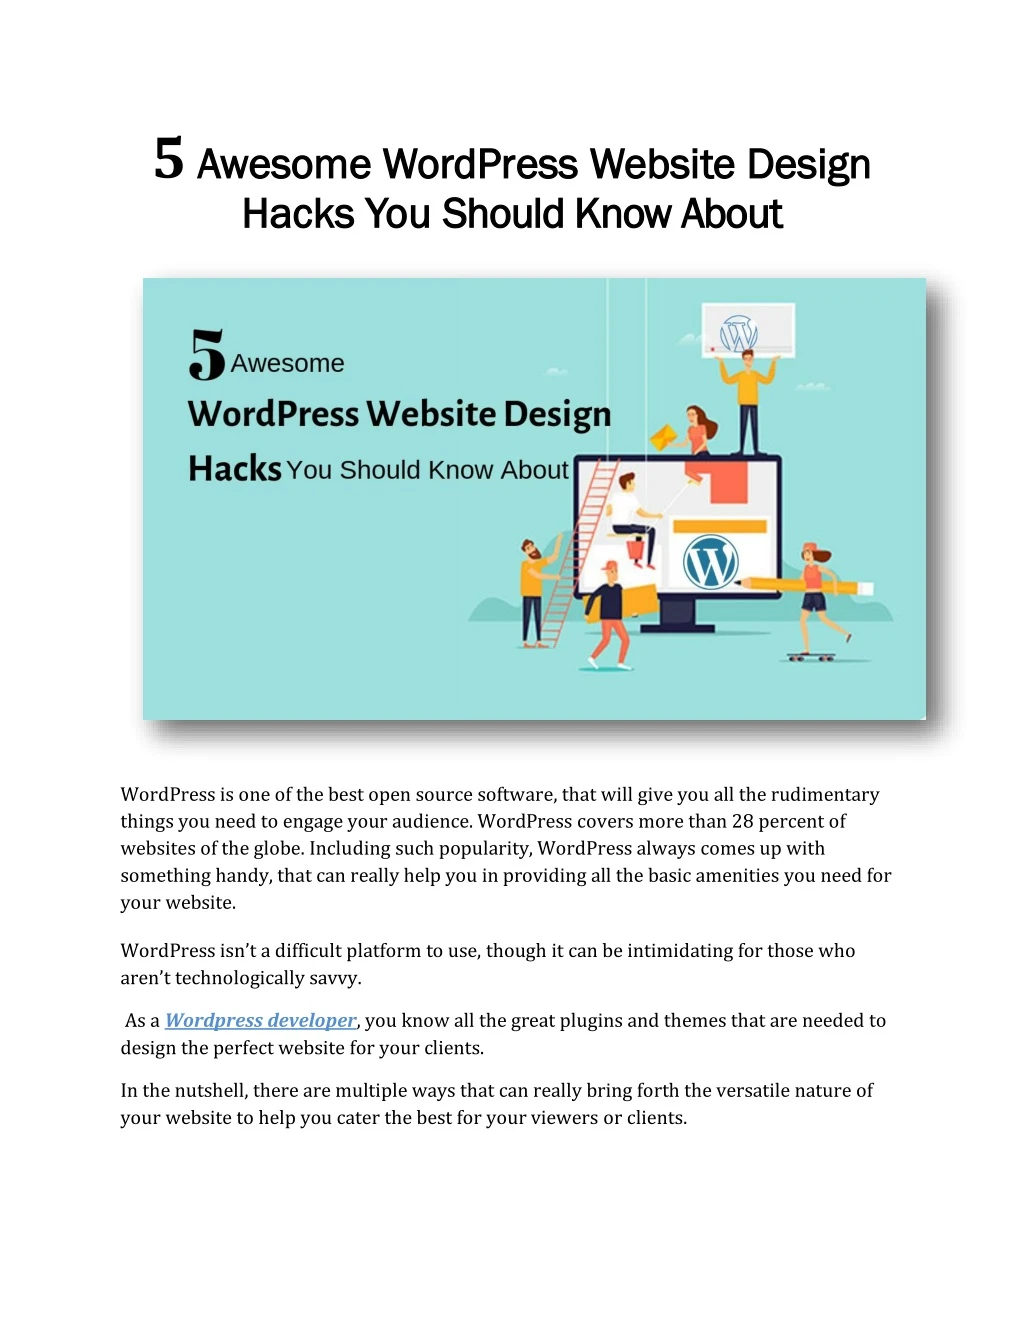 5 awesome wordpress website design awesome